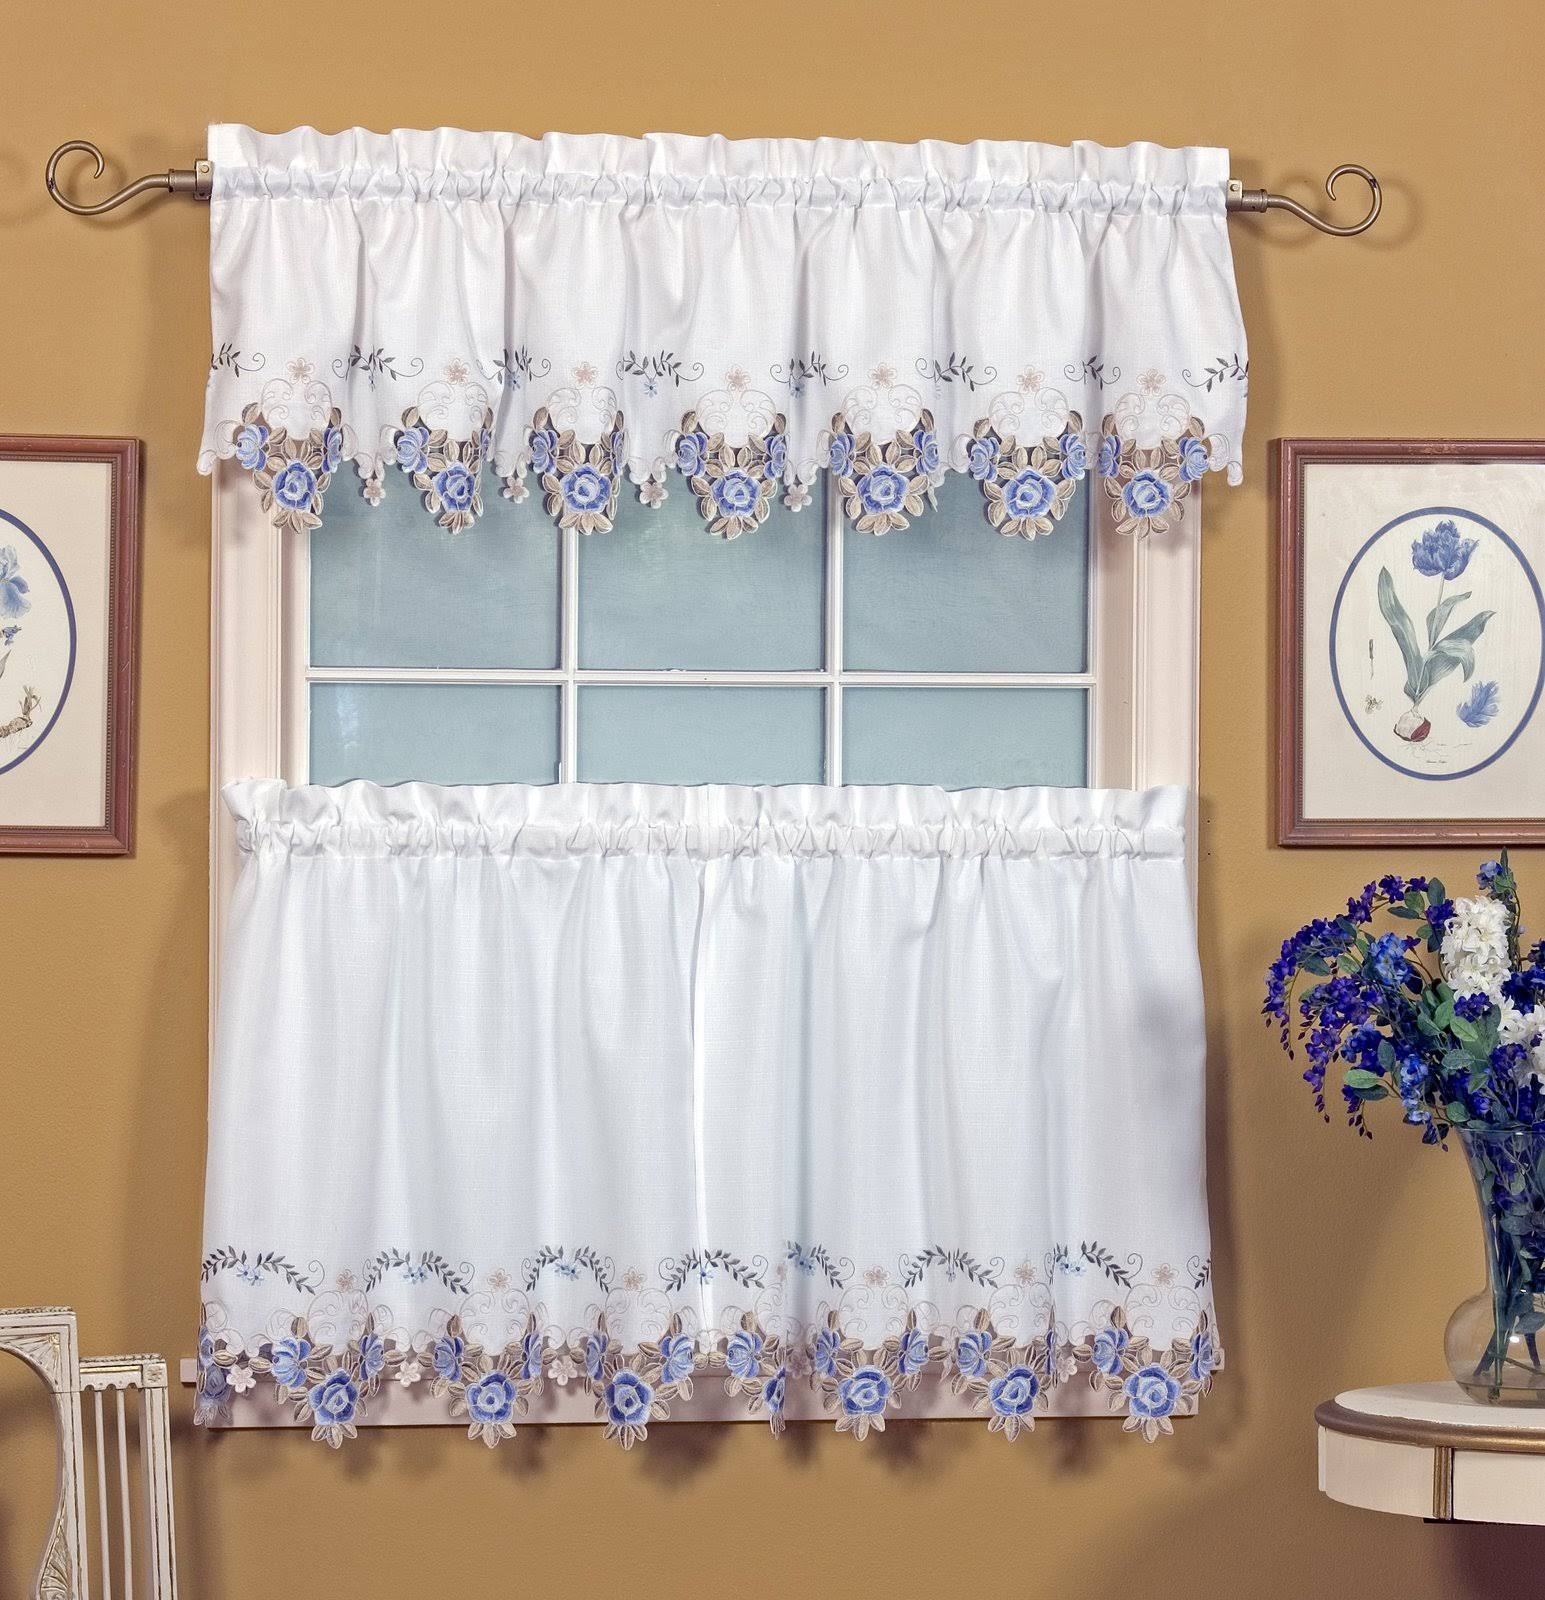 Todays Curtain Verona Reverse Embroidery Valance, 14-Inch, White/Blue